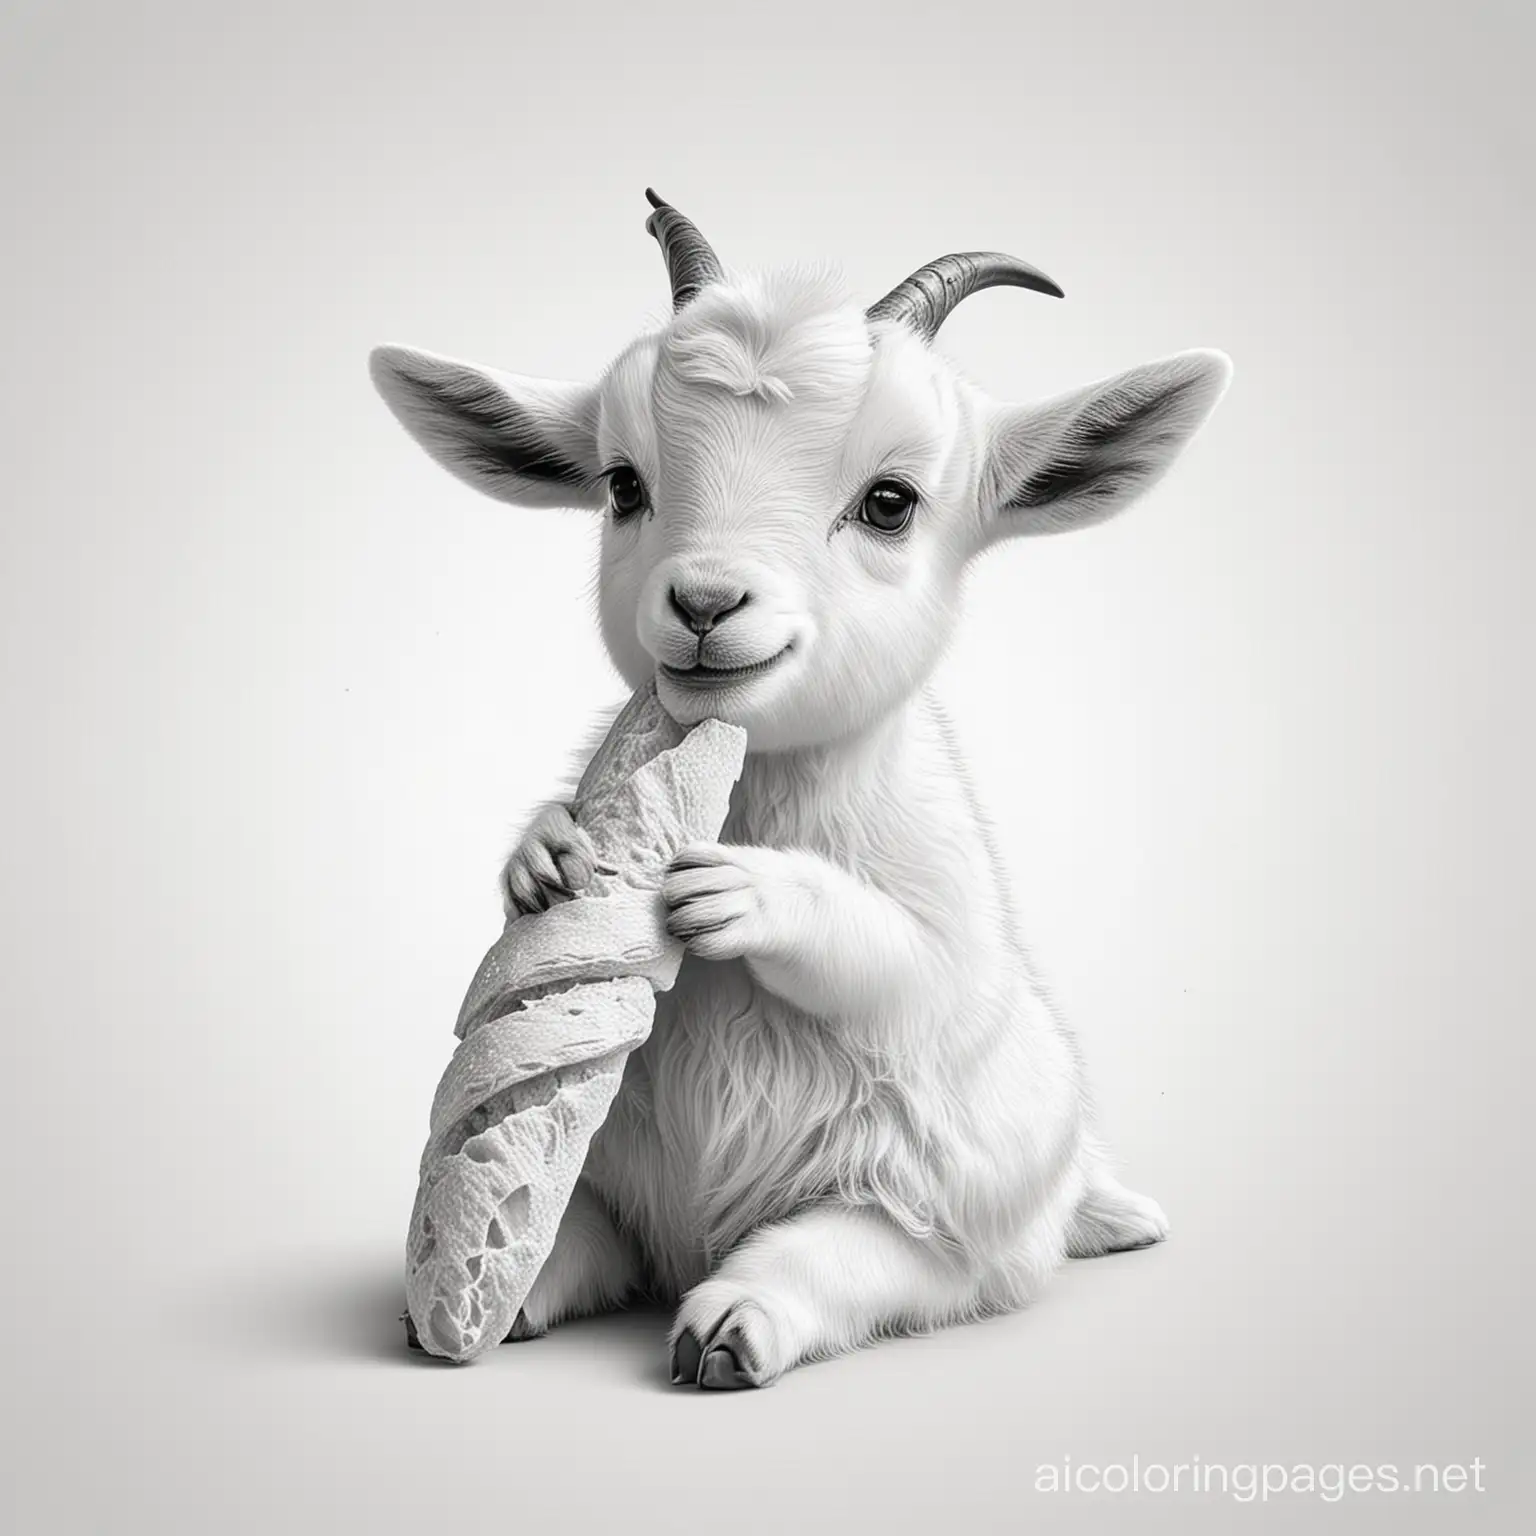 adorable baby goat eating baguette
, Coloring Page, black and white, line art, white background, Simplicity, Ample White Space. The background of the coloring page is plain white to make it easy for young children to color within the lines. The outlines of all the subjects are easy to distinguish, making it simple for kids to color without too much difficulty